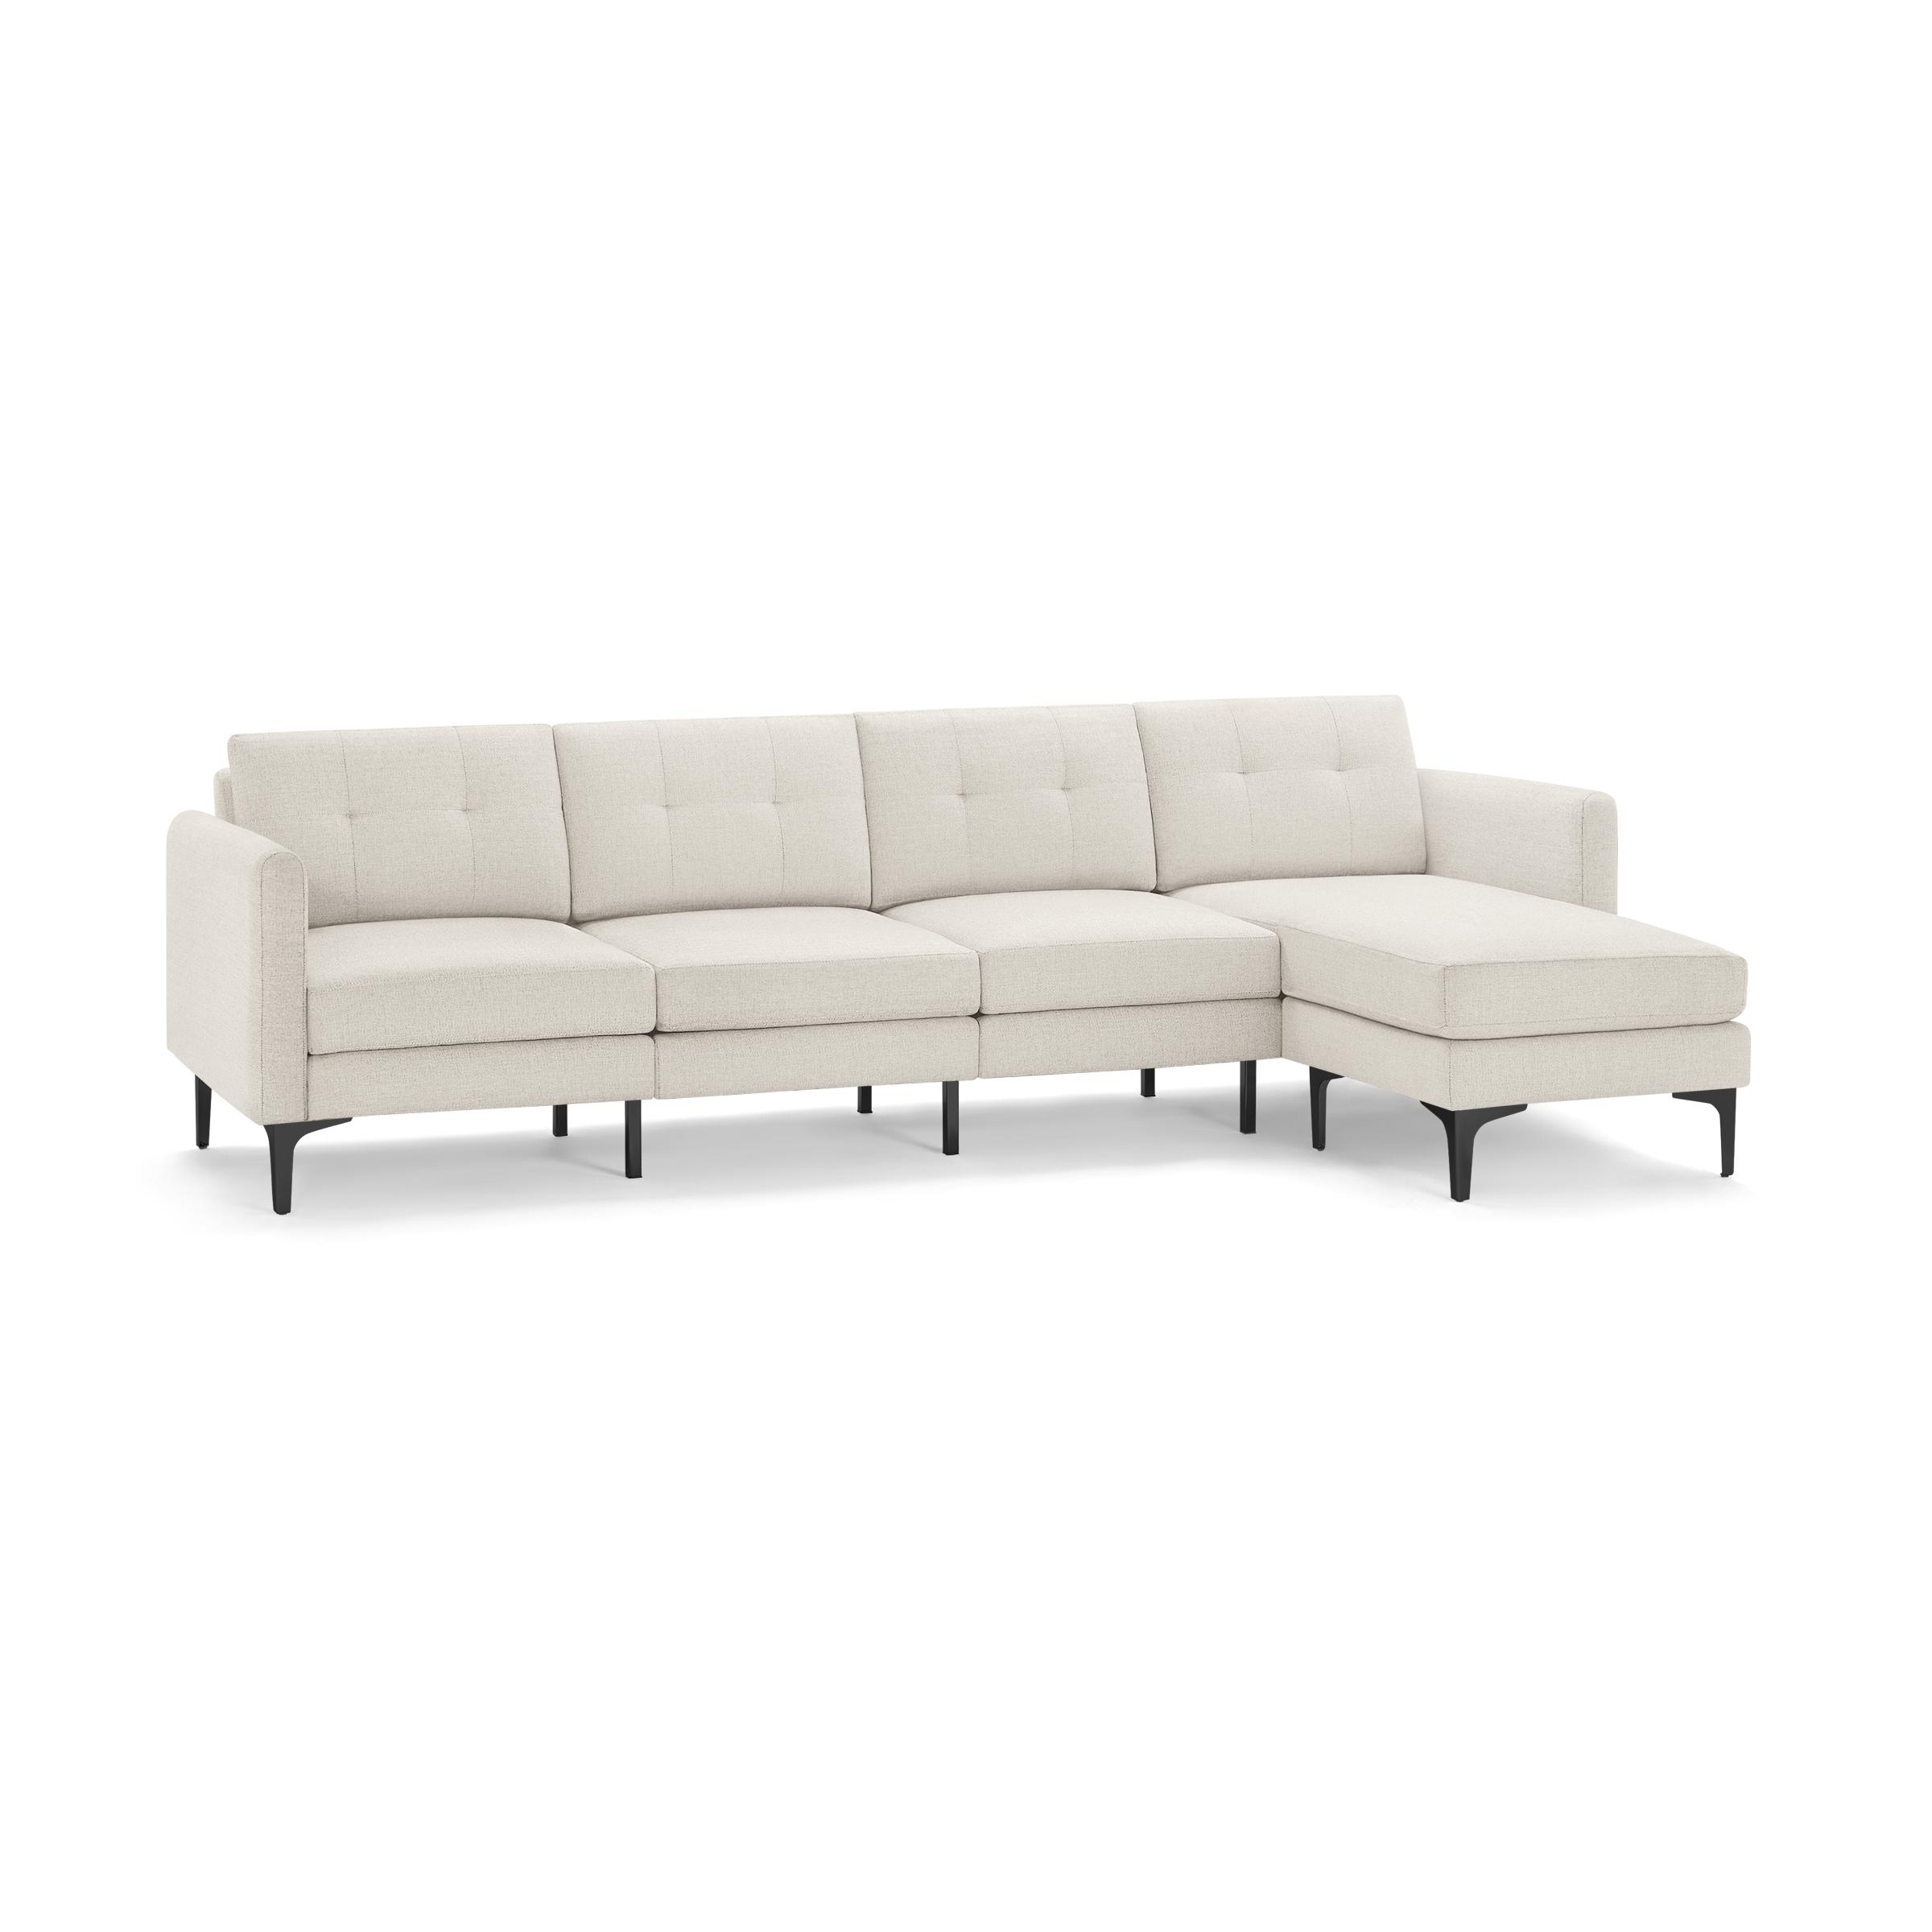 Nomad King Sectional in Ivory, Black Metal Legs - Image 1